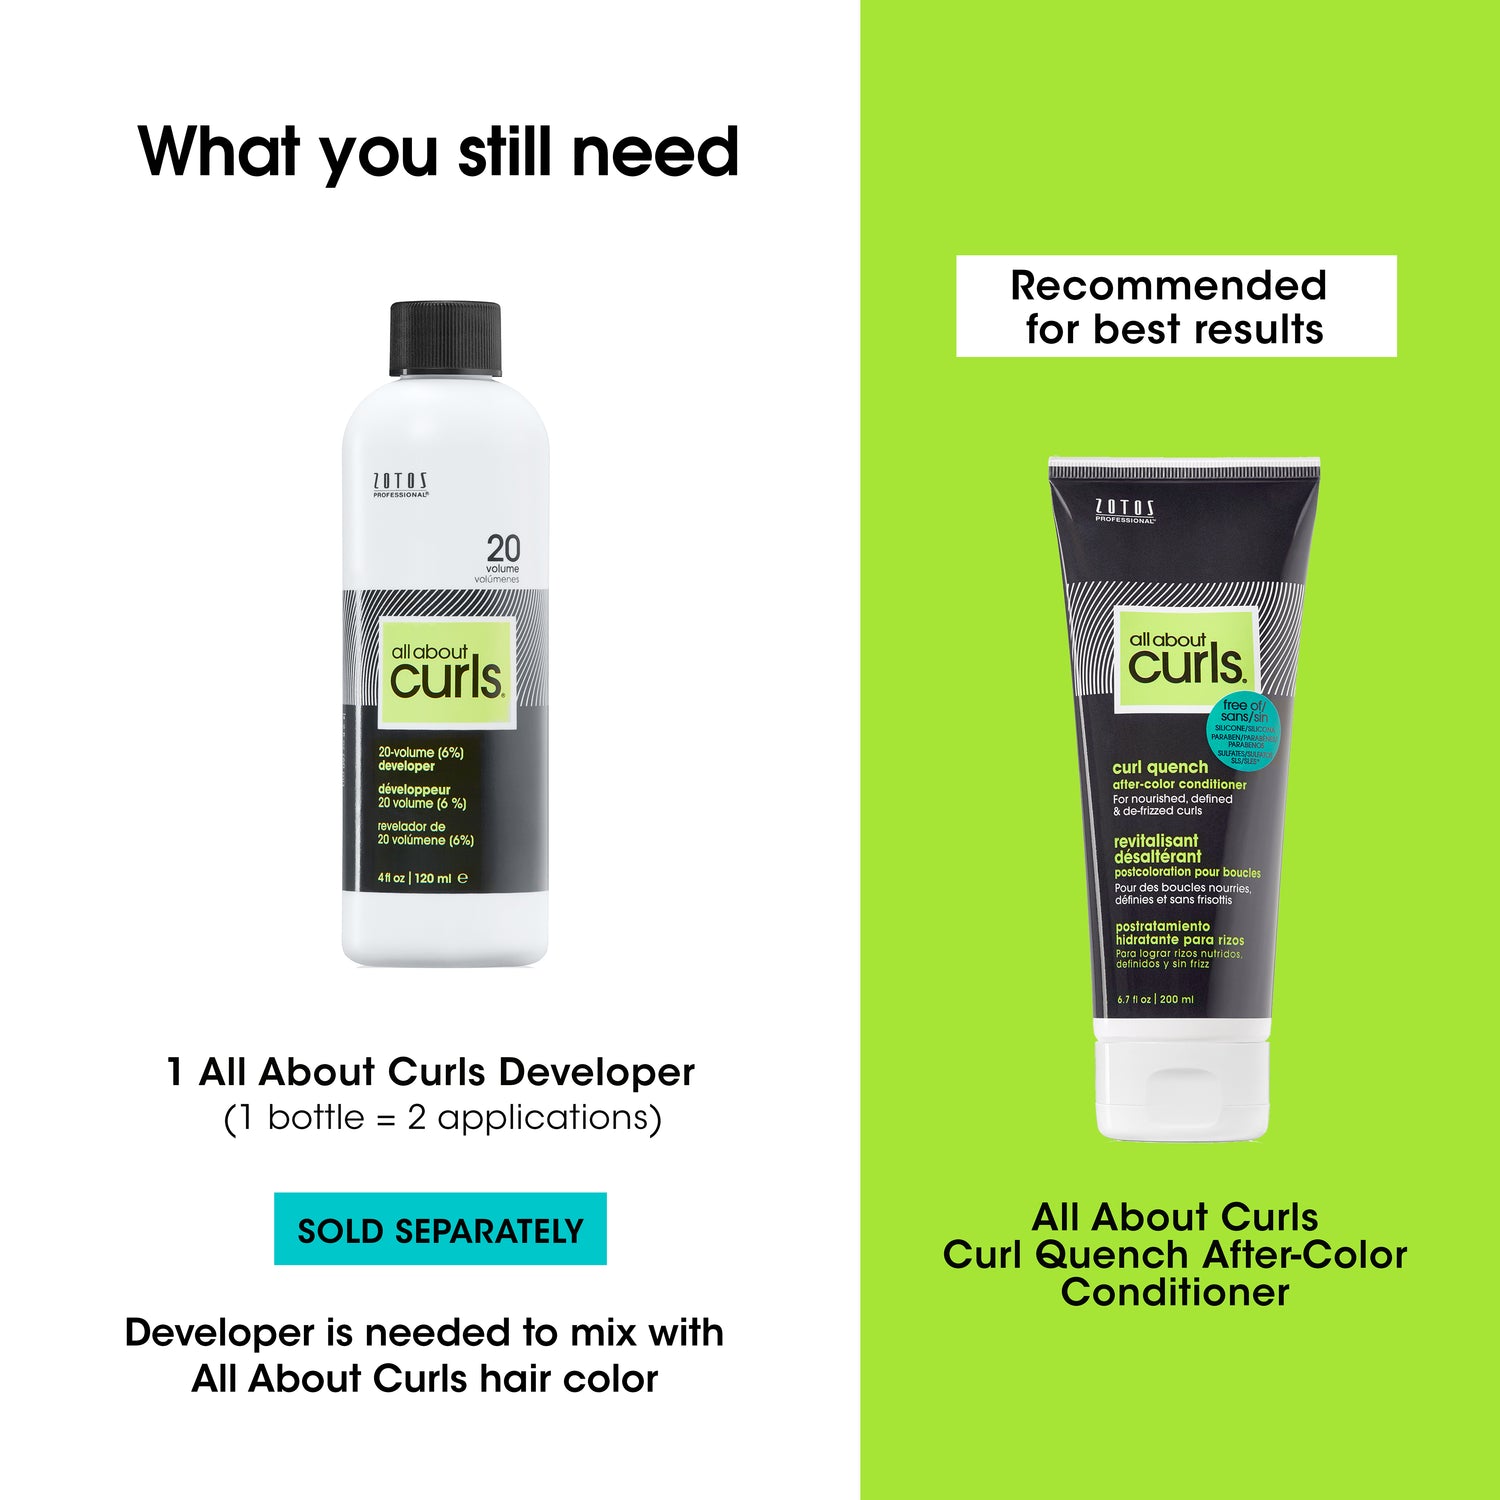 What you still need: 1 All About Curls Developer (1 bottle=2 applications). Developer is needed to mix with All About Curls hair color. In addition, it is recommended to use the All About Curls Curl Quench After-Color Conditioner.